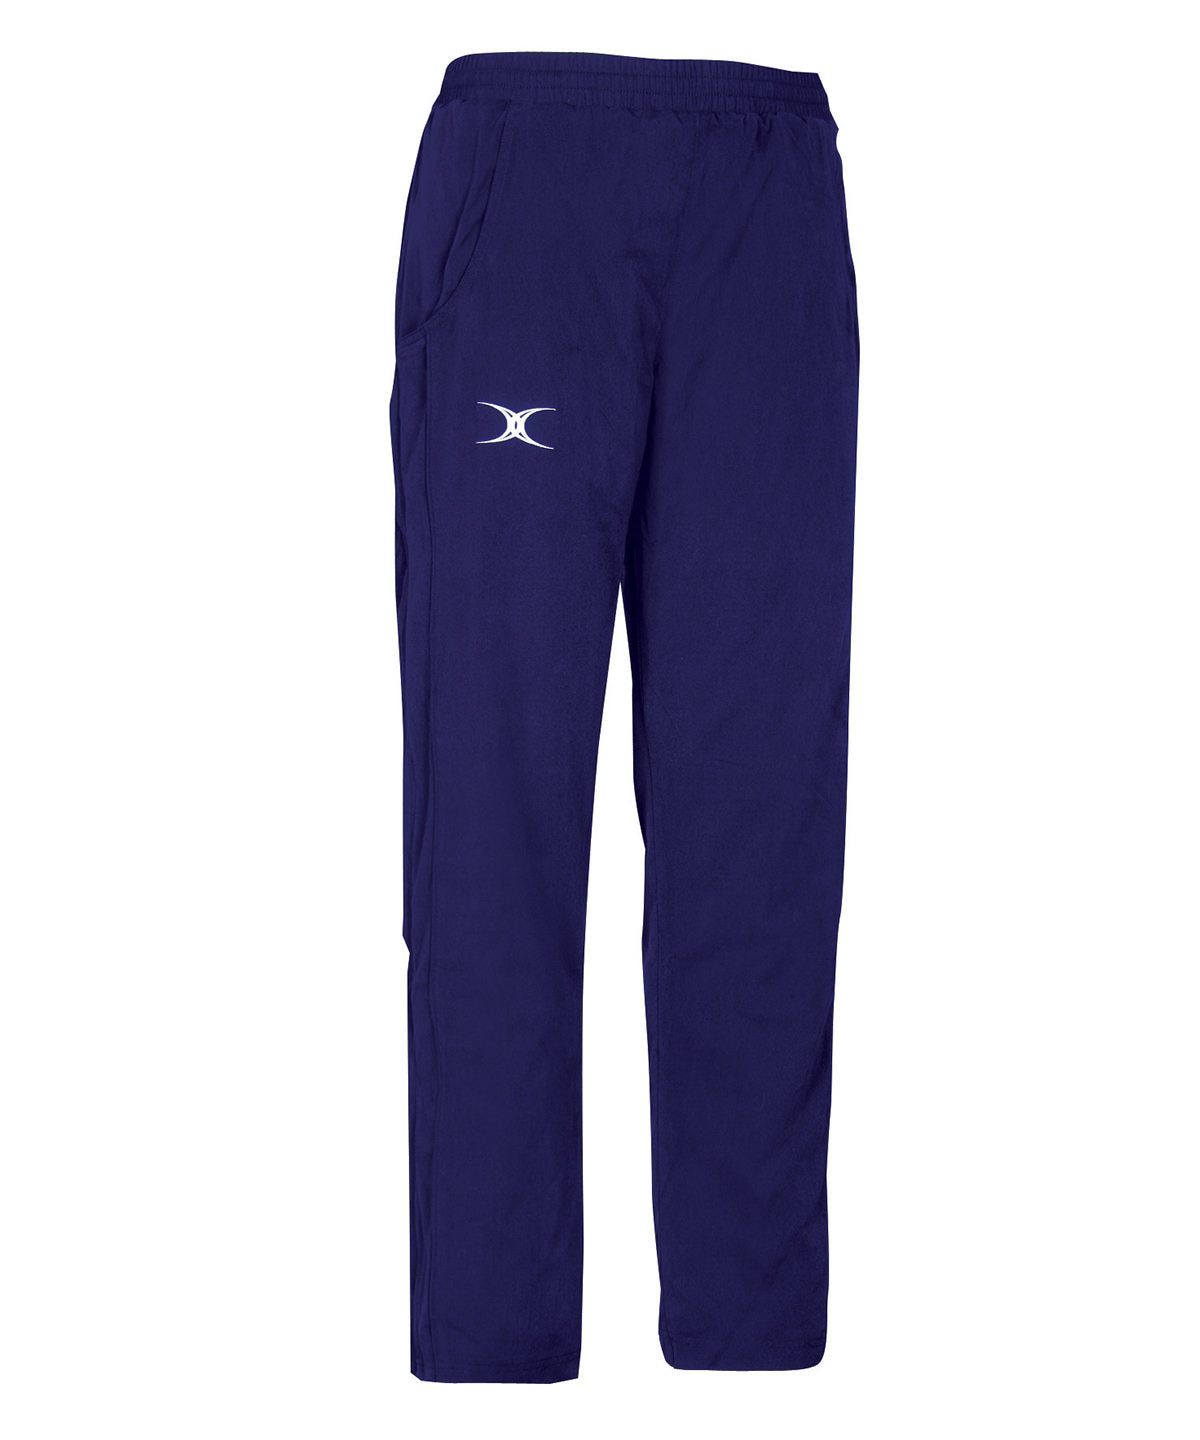 Kids Synergie trousers